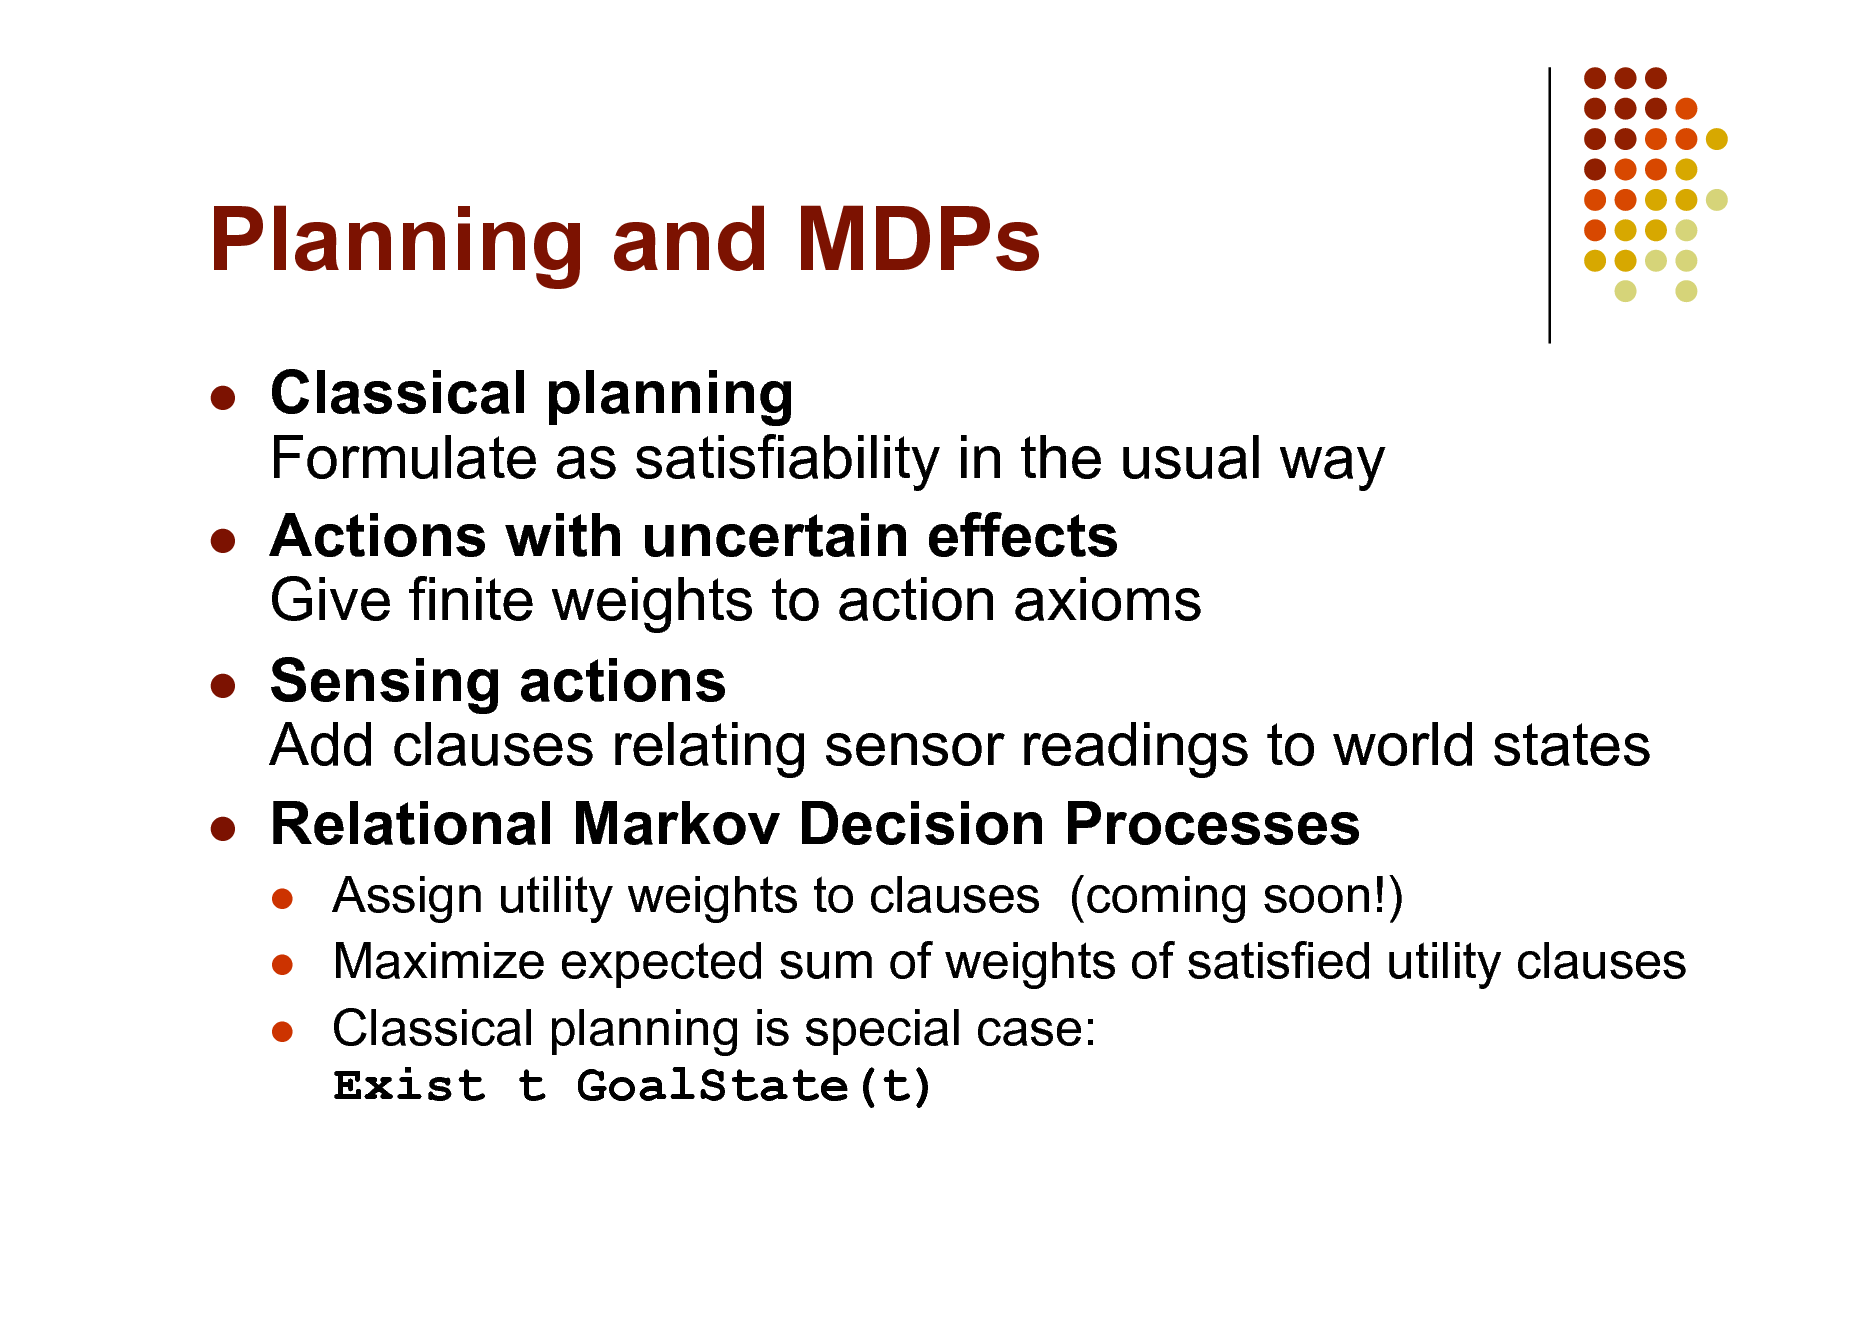 Slide: Planning and MDPs
   

Classical planning Formulate as satisfiability in the usual way Actions with uncertain effects Give finite weights to action axioms Sensing actions Add clauses relating sensor readings to world states Relational Markov Decision Processes
  

Assign utility weights to clauses (coming soon!) Maximize expected sum of weights of satisfied utility clauses Classical planning is special case: Exist t GoalState(t)

